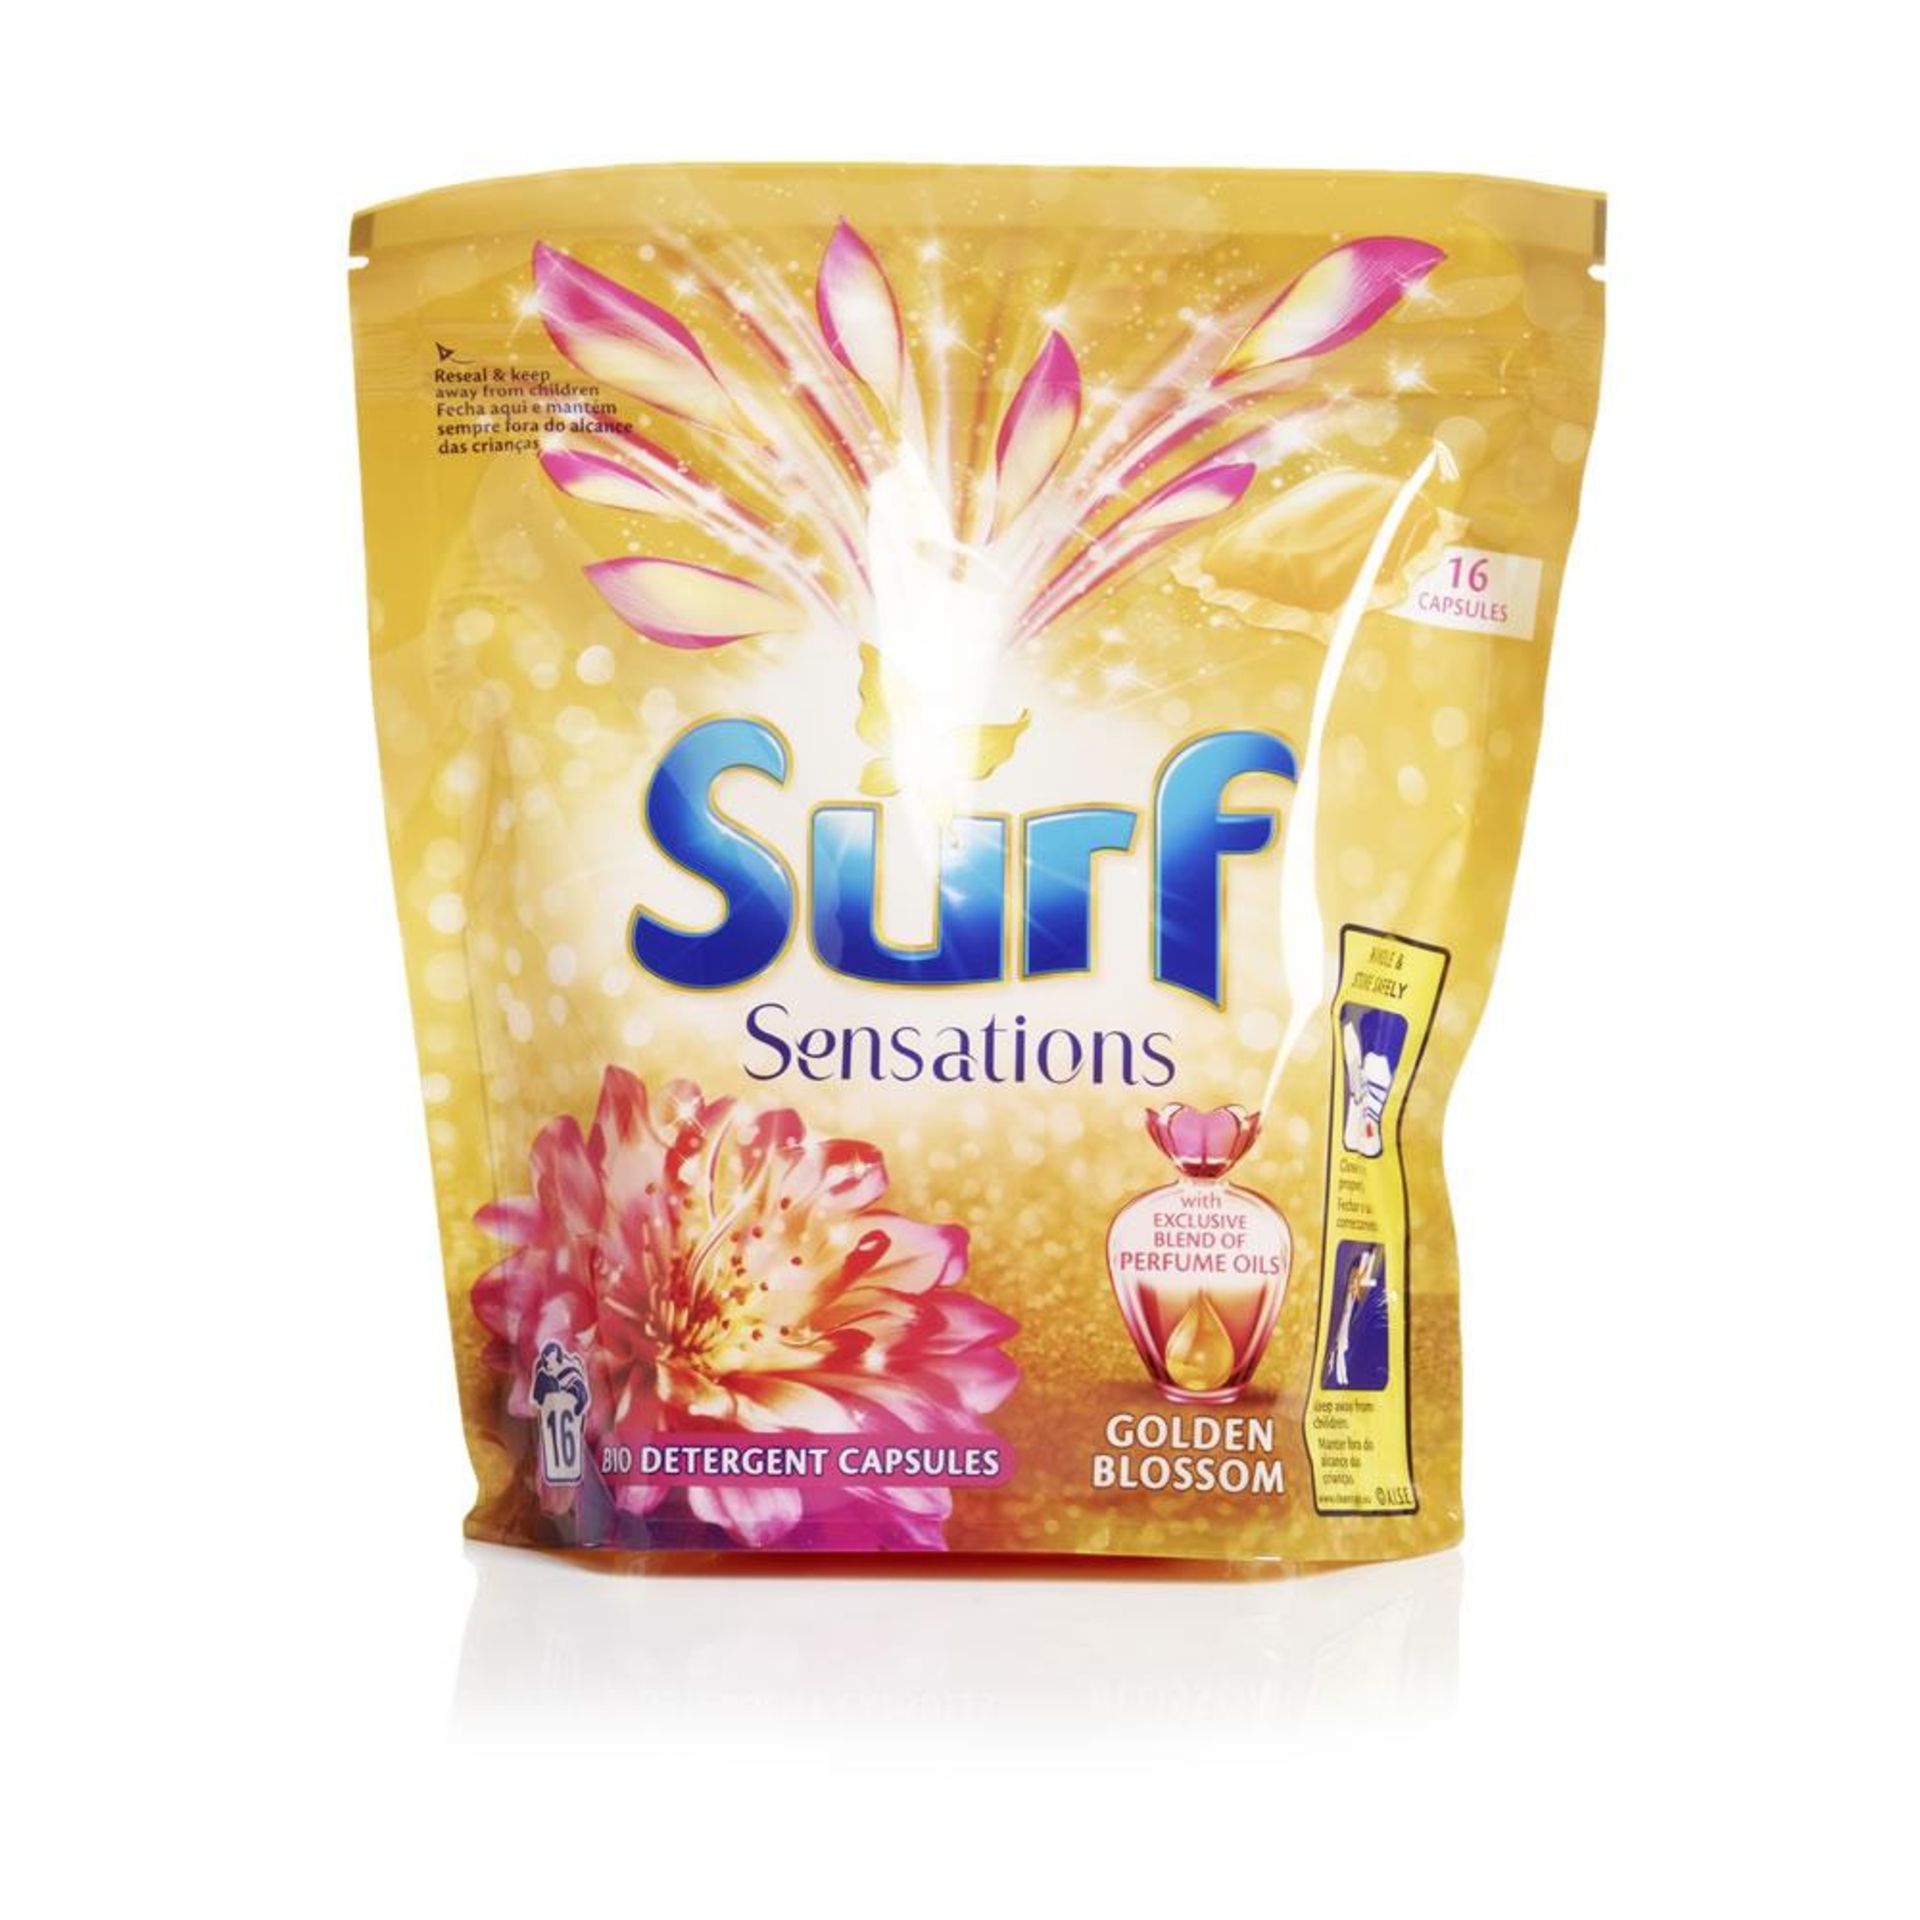 V *TRADE QTY* Brand New Surf Sensations Golden Blossom 18 Wash Capsules X 3 YOUR BID PRICE TO BE